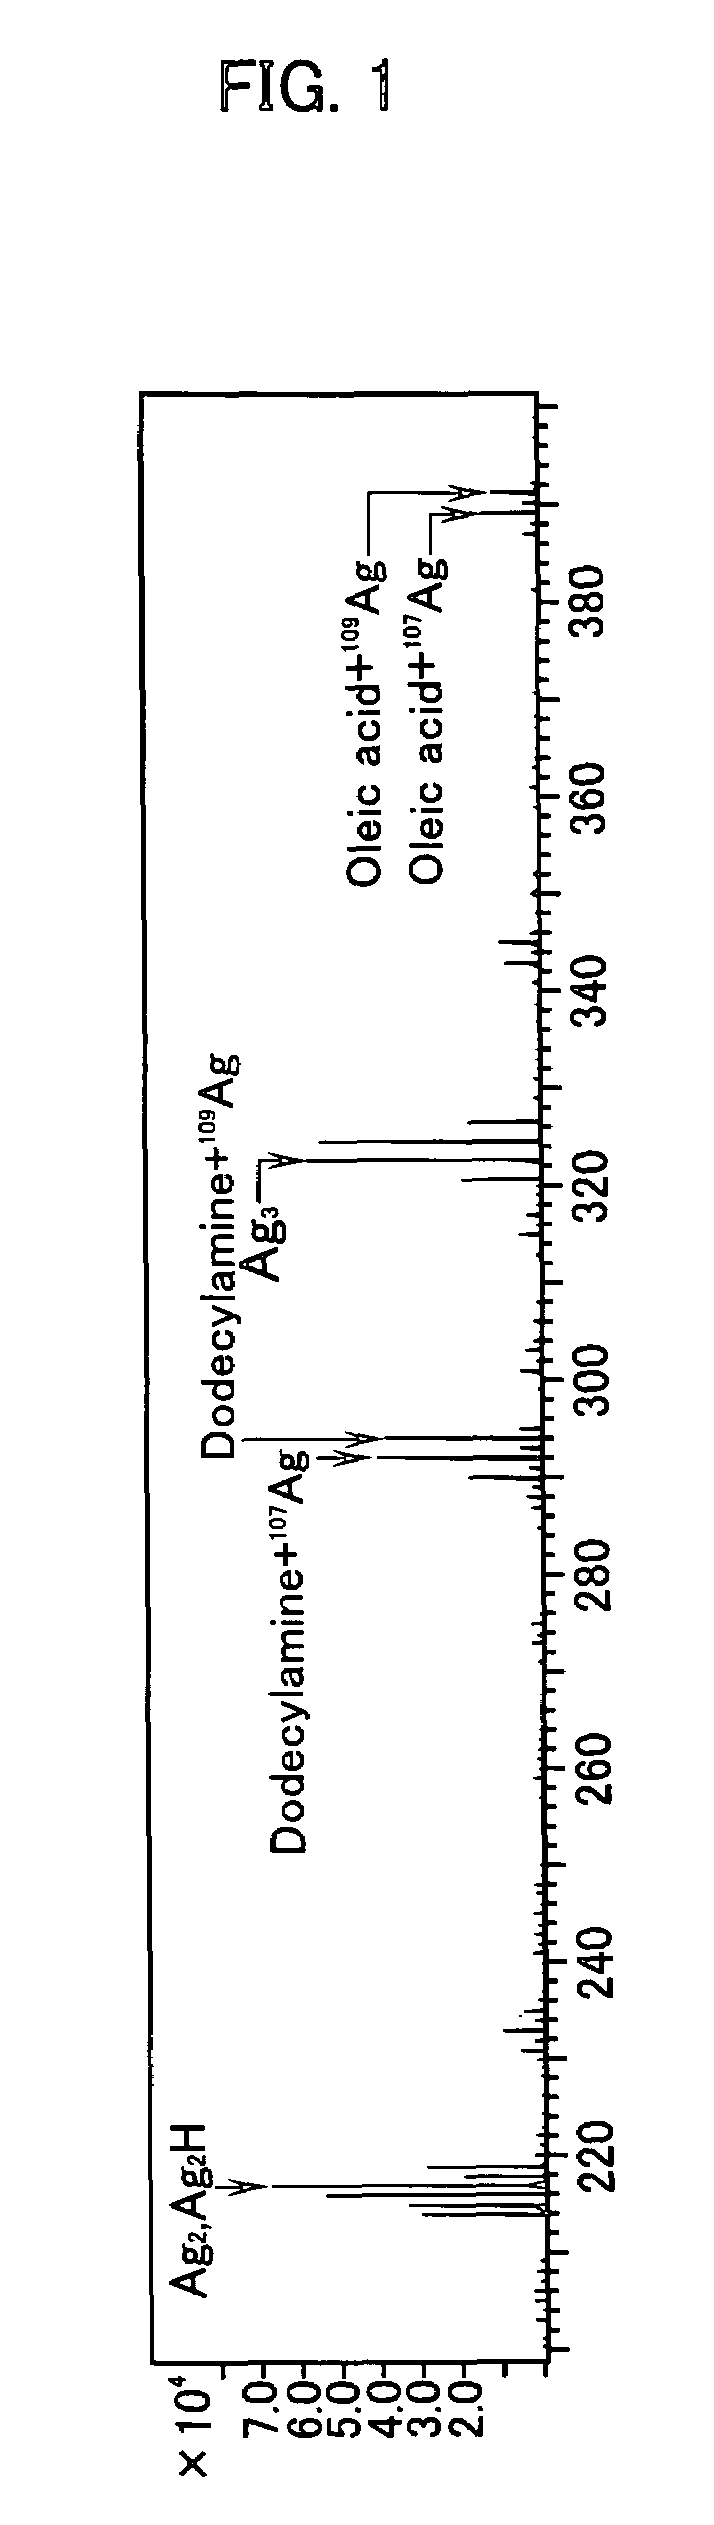 Metal nano-particles and method for preparing the same, dispersion of metal nano-particles and method for preparing the same, and thin metallic wire and metal film and method for preparing these substances